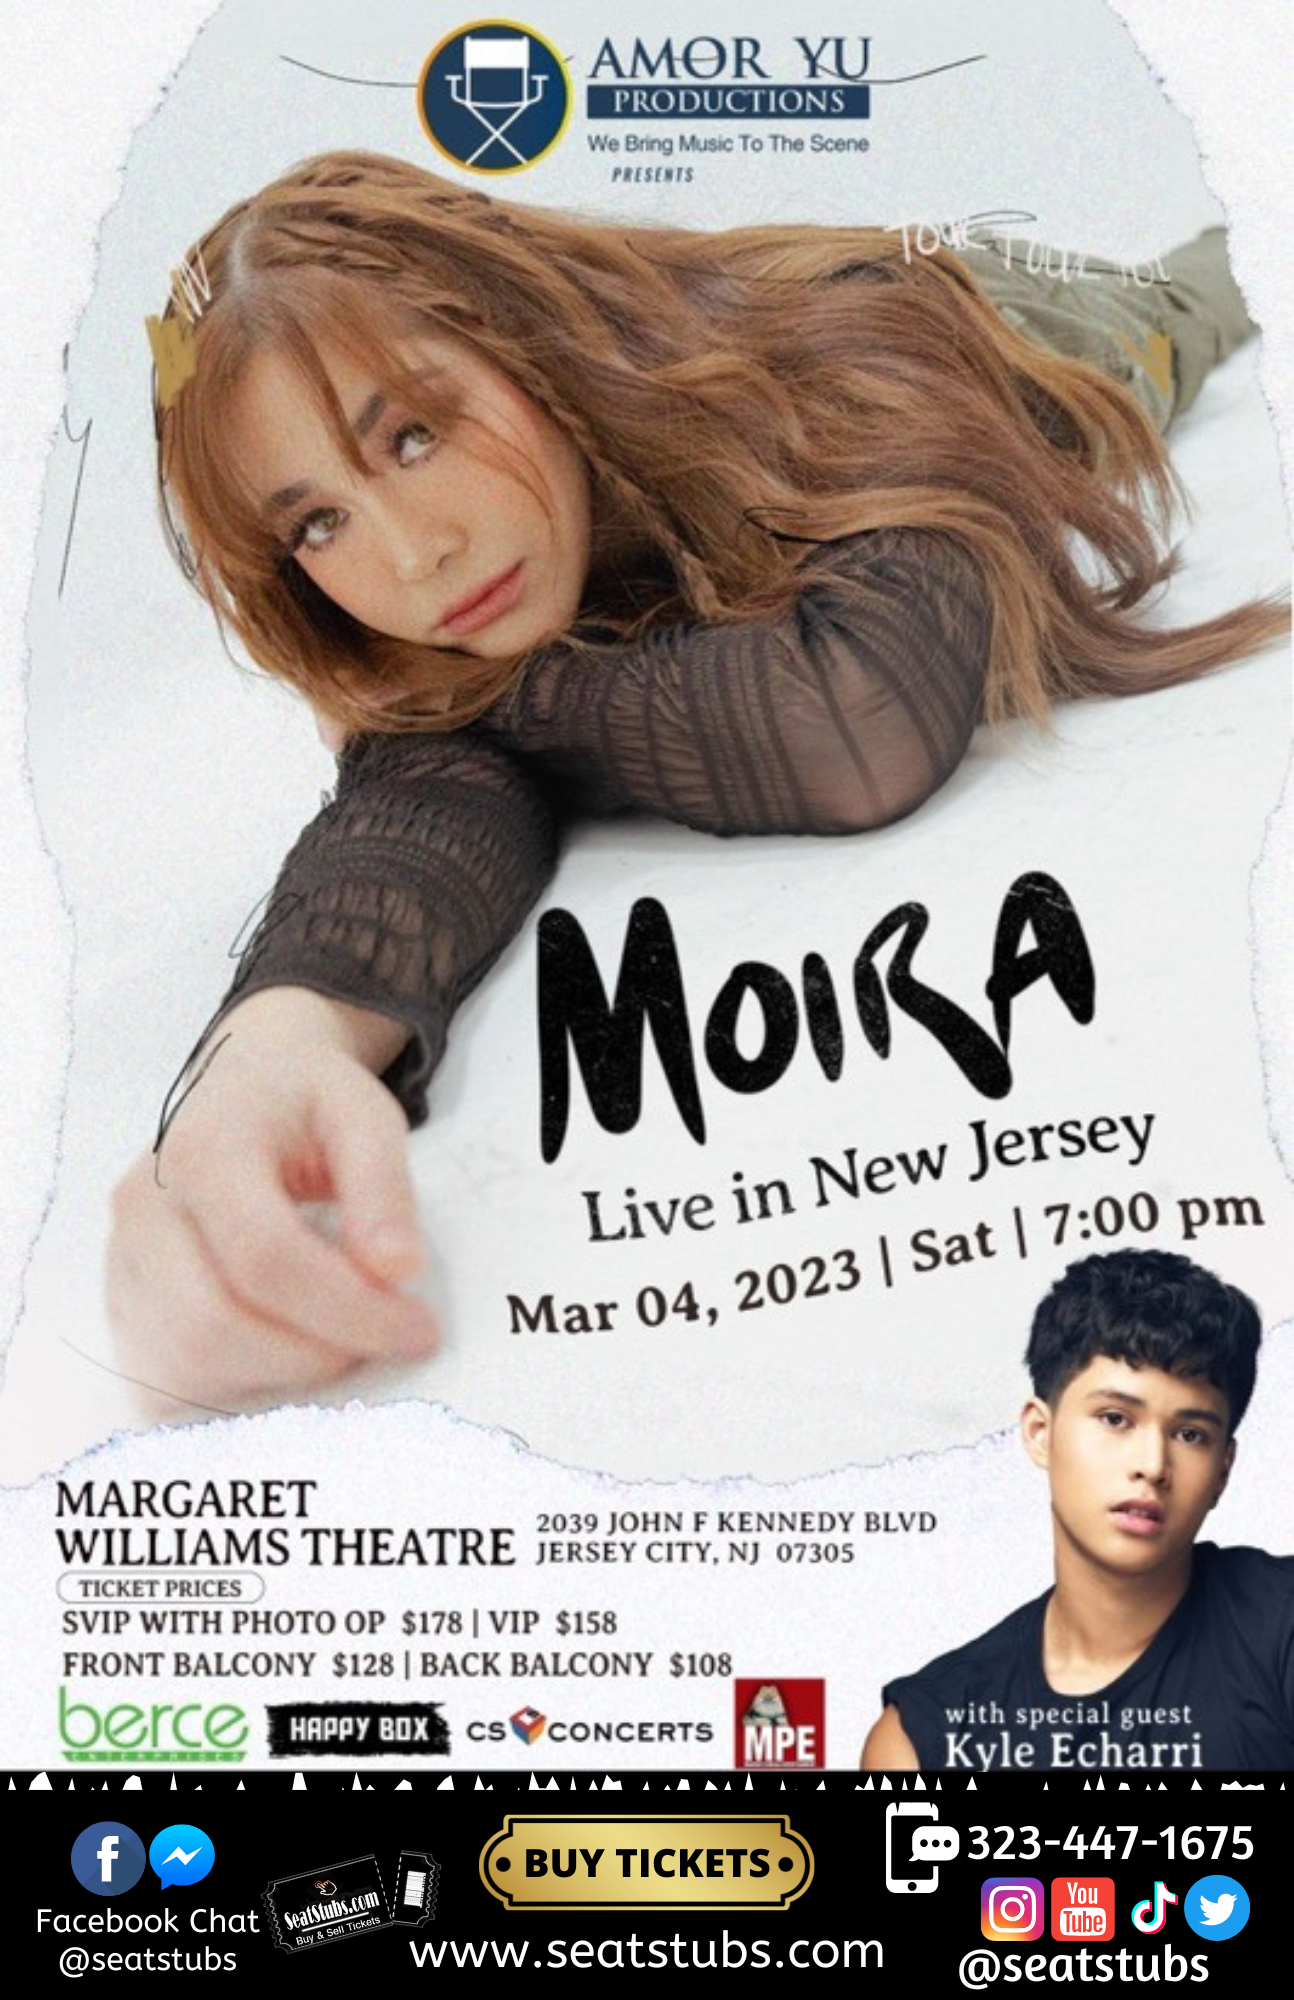 MOIRA LIVE IN NEW JERSEY MARCH 4 2023